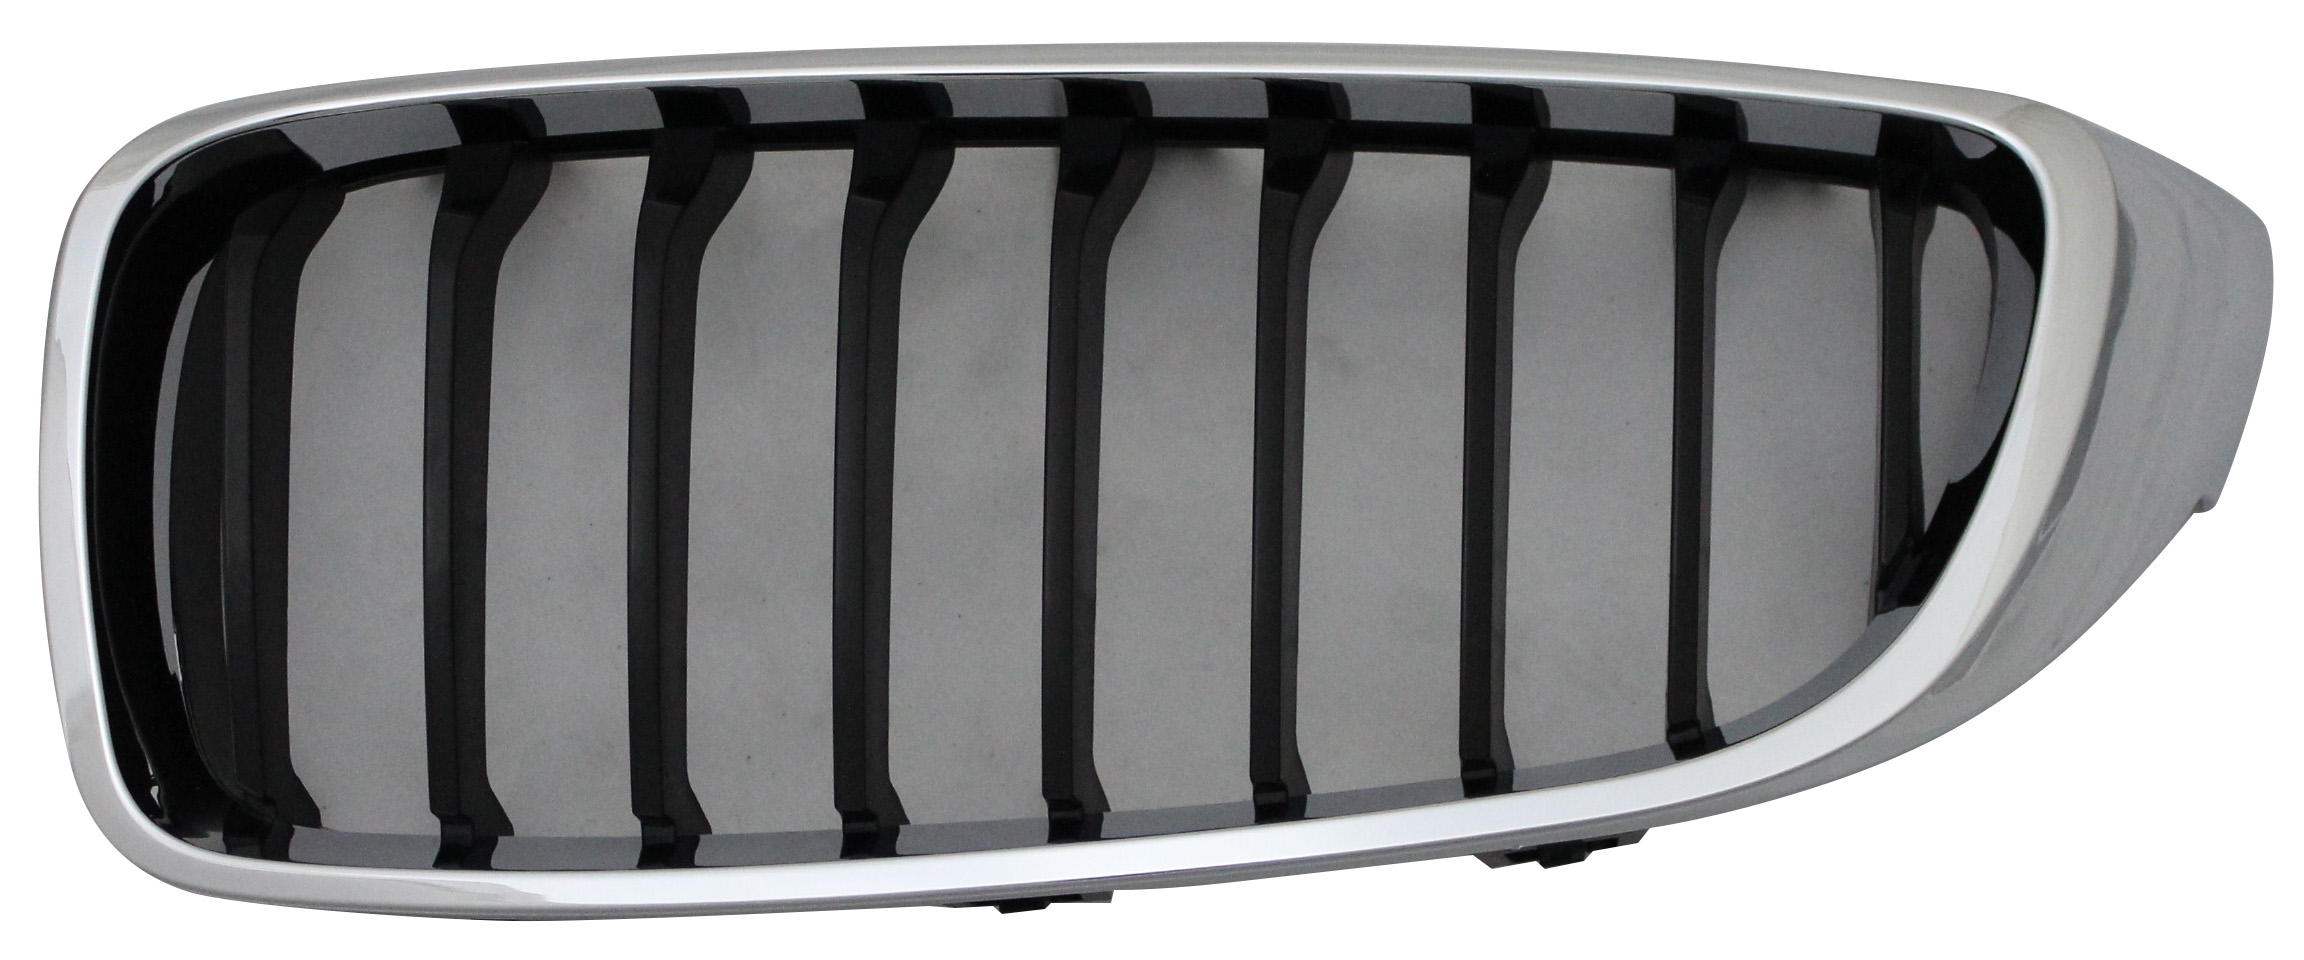 Aftermarket GRILLES for BMW - 430I GRAN COUPE, 430i Gran Coupe,17-19,Grille assy